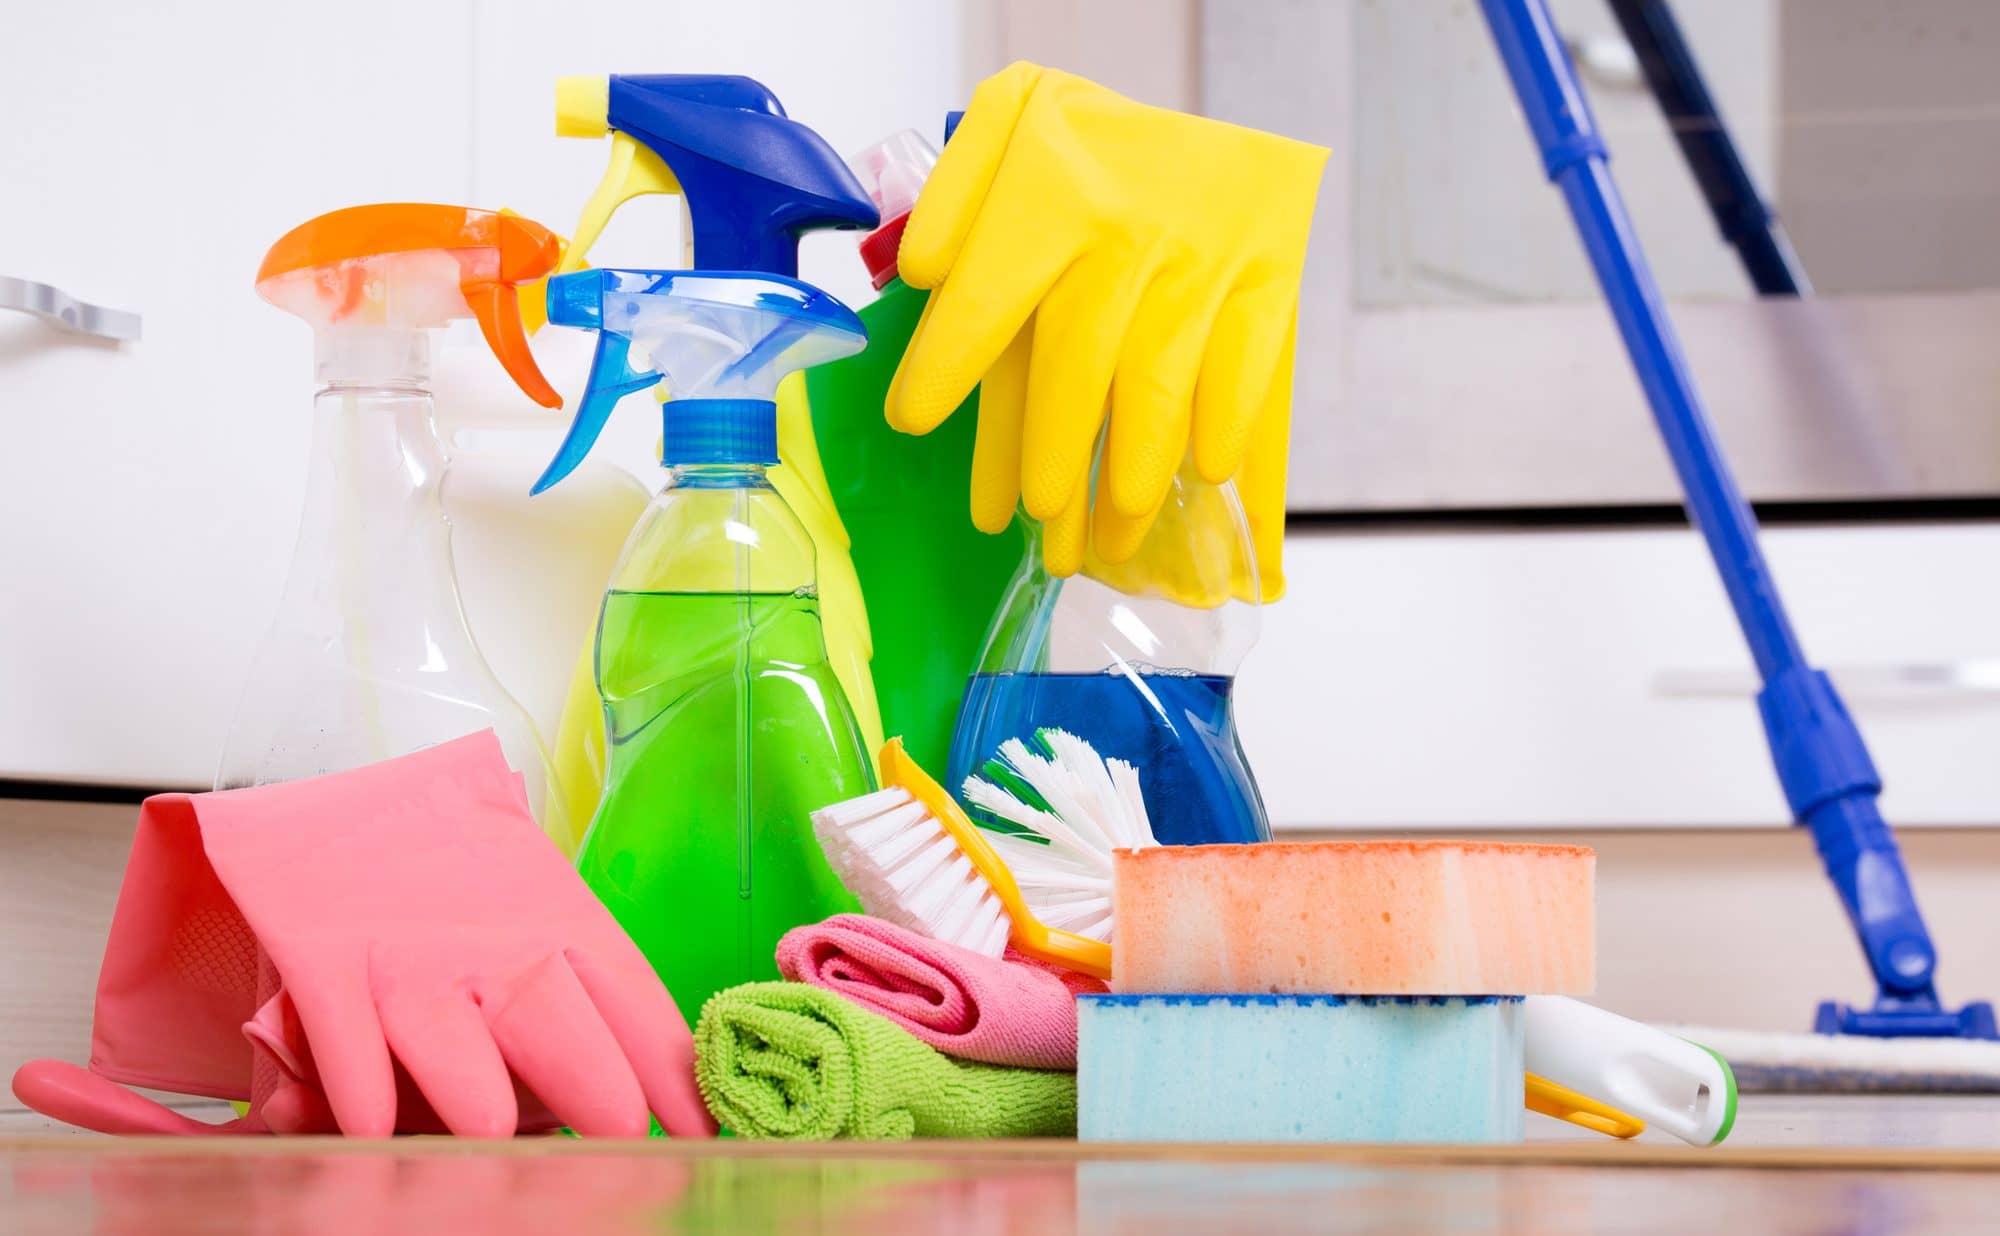 Primavera Cleaning - Cleaning Service, Madison, WI